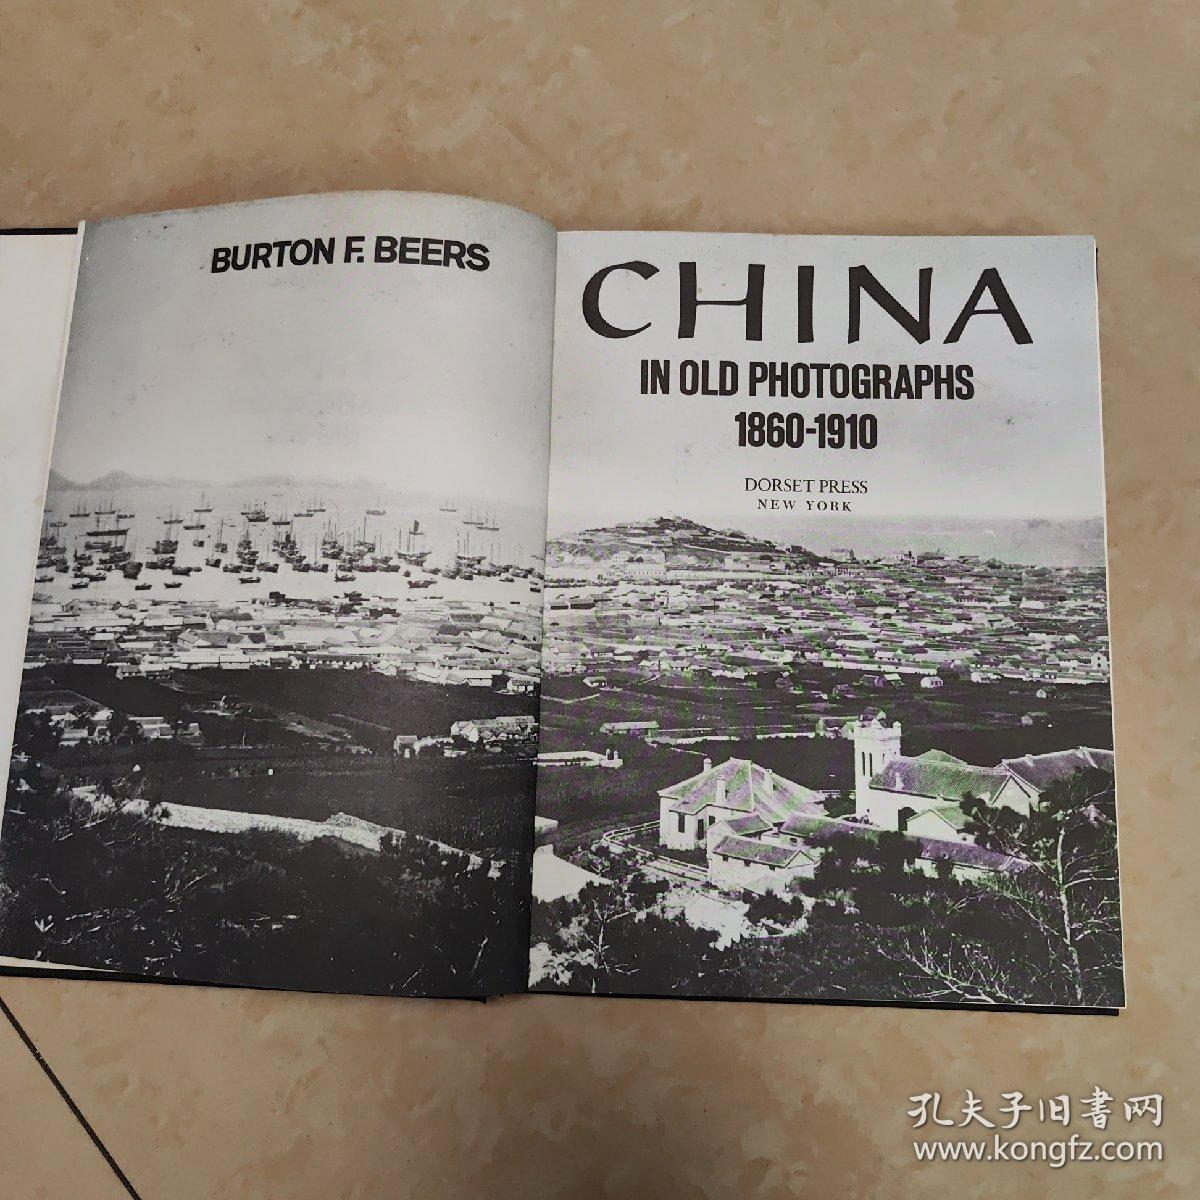 China in old photographs 1860-1910 中国旧影